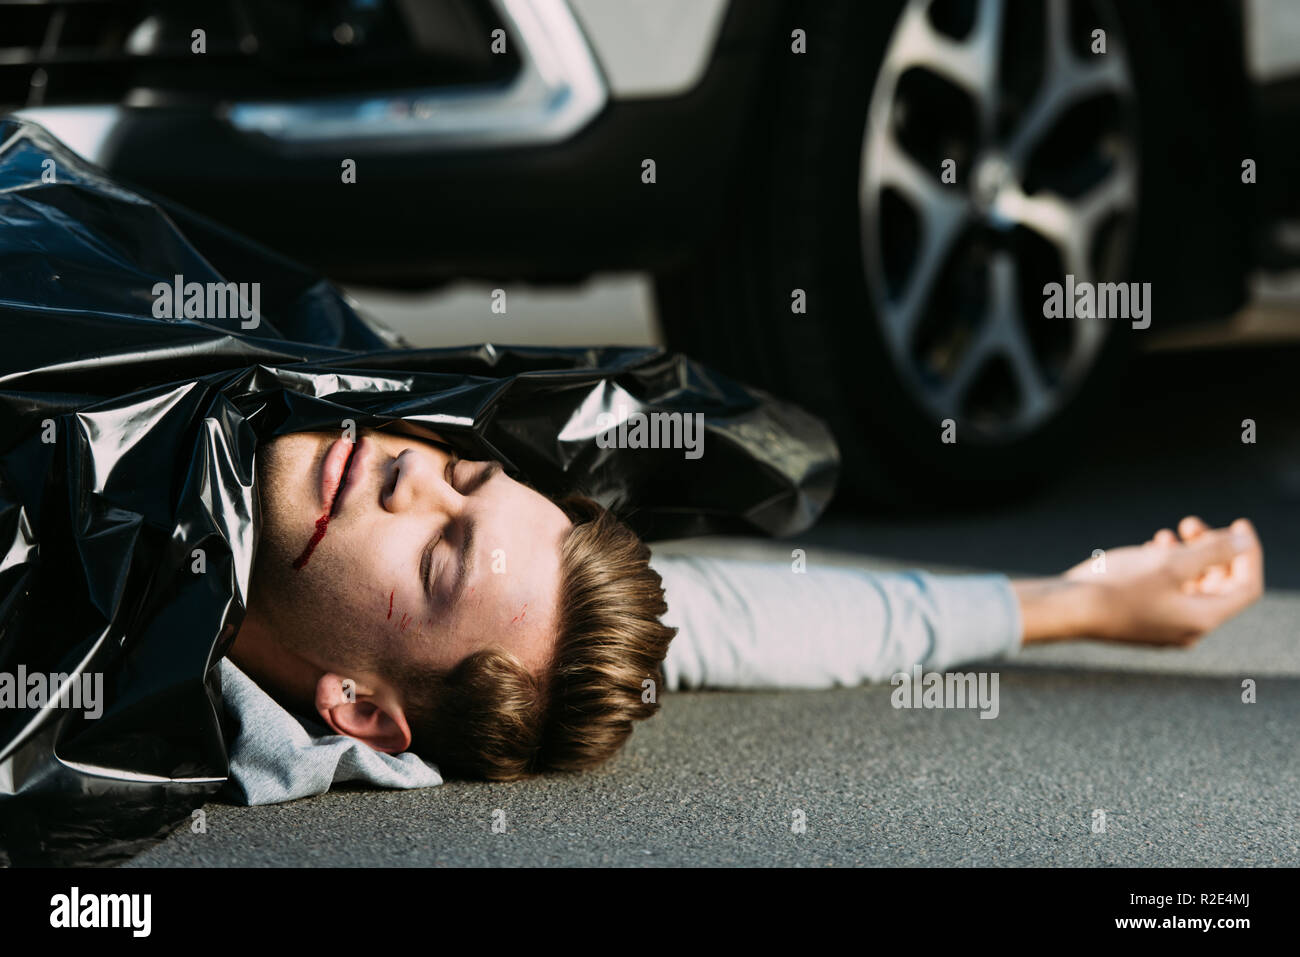 close-up view of dead body on road after traffic collision Stock Photo